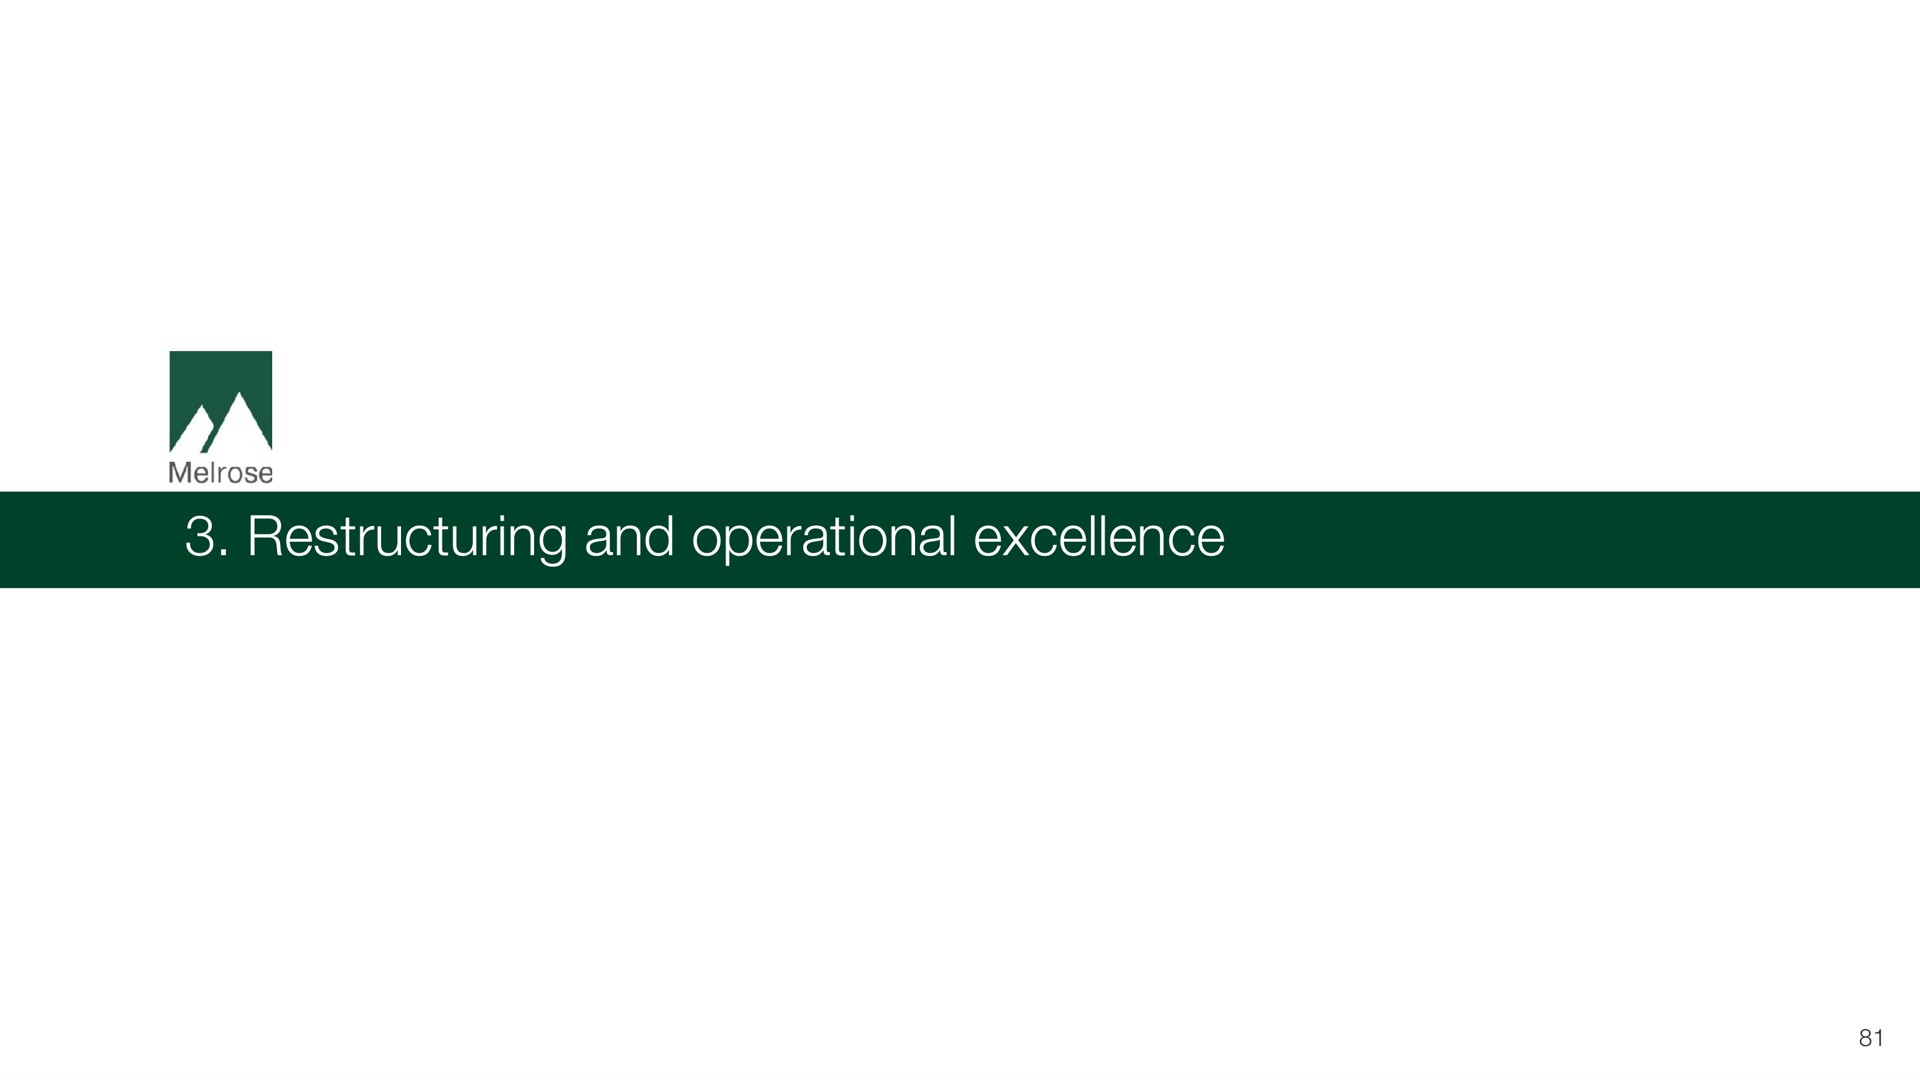 and operational excellence | Melrose